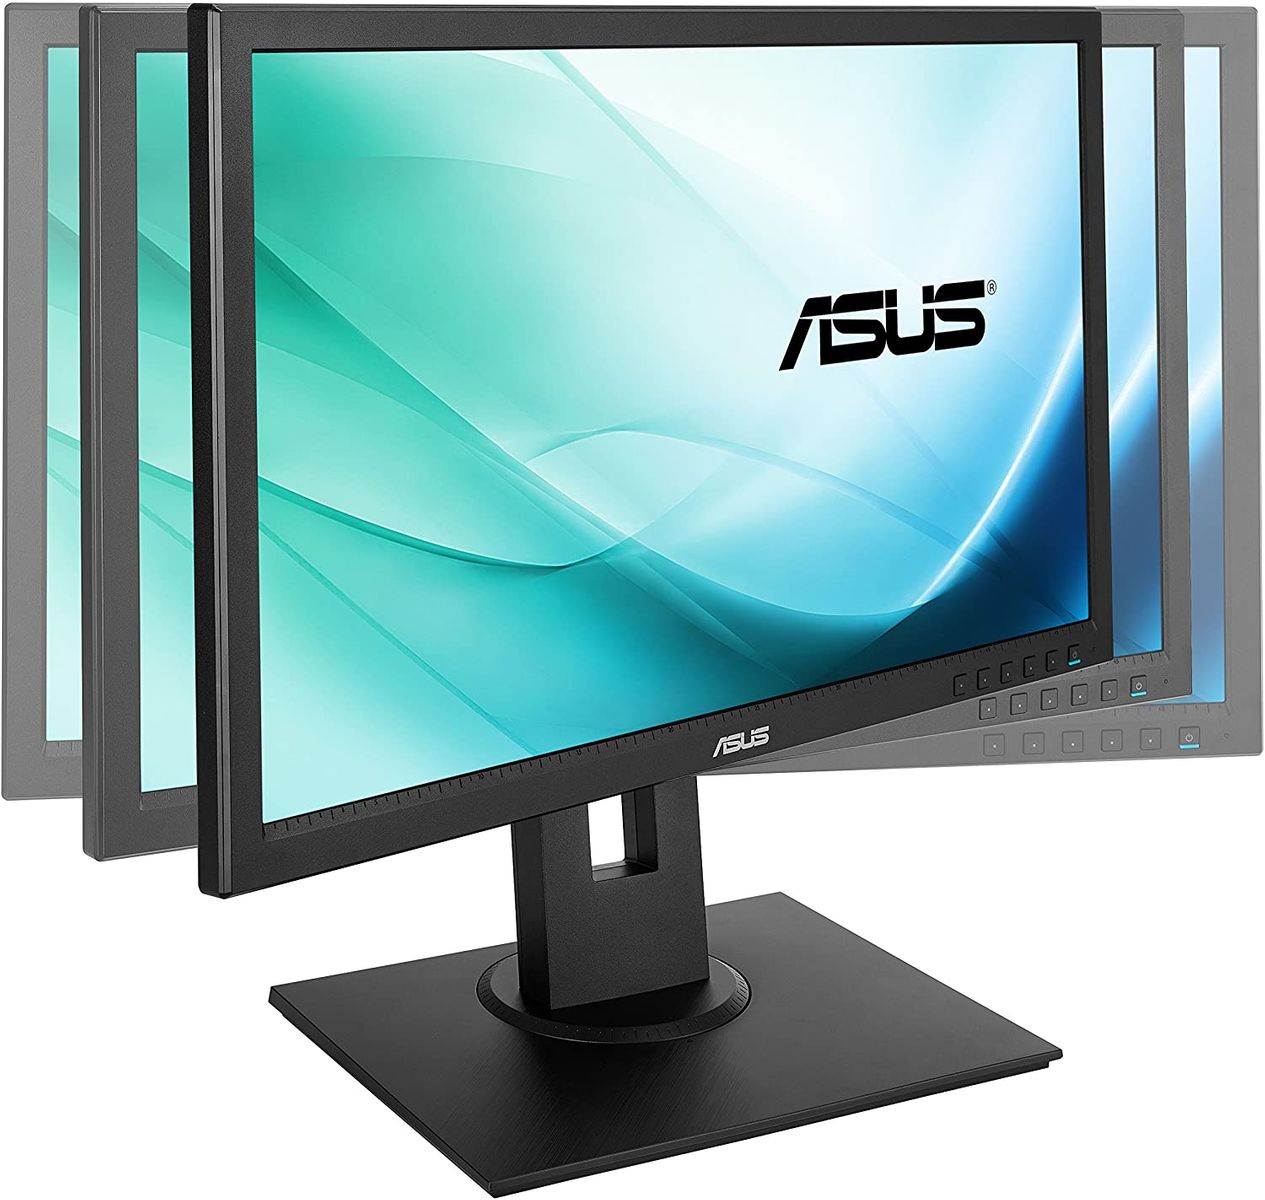 ASUS BE229QLB 21.5" (54.6cm) Full HD LED IPS 5ms Business Monitor schwarz